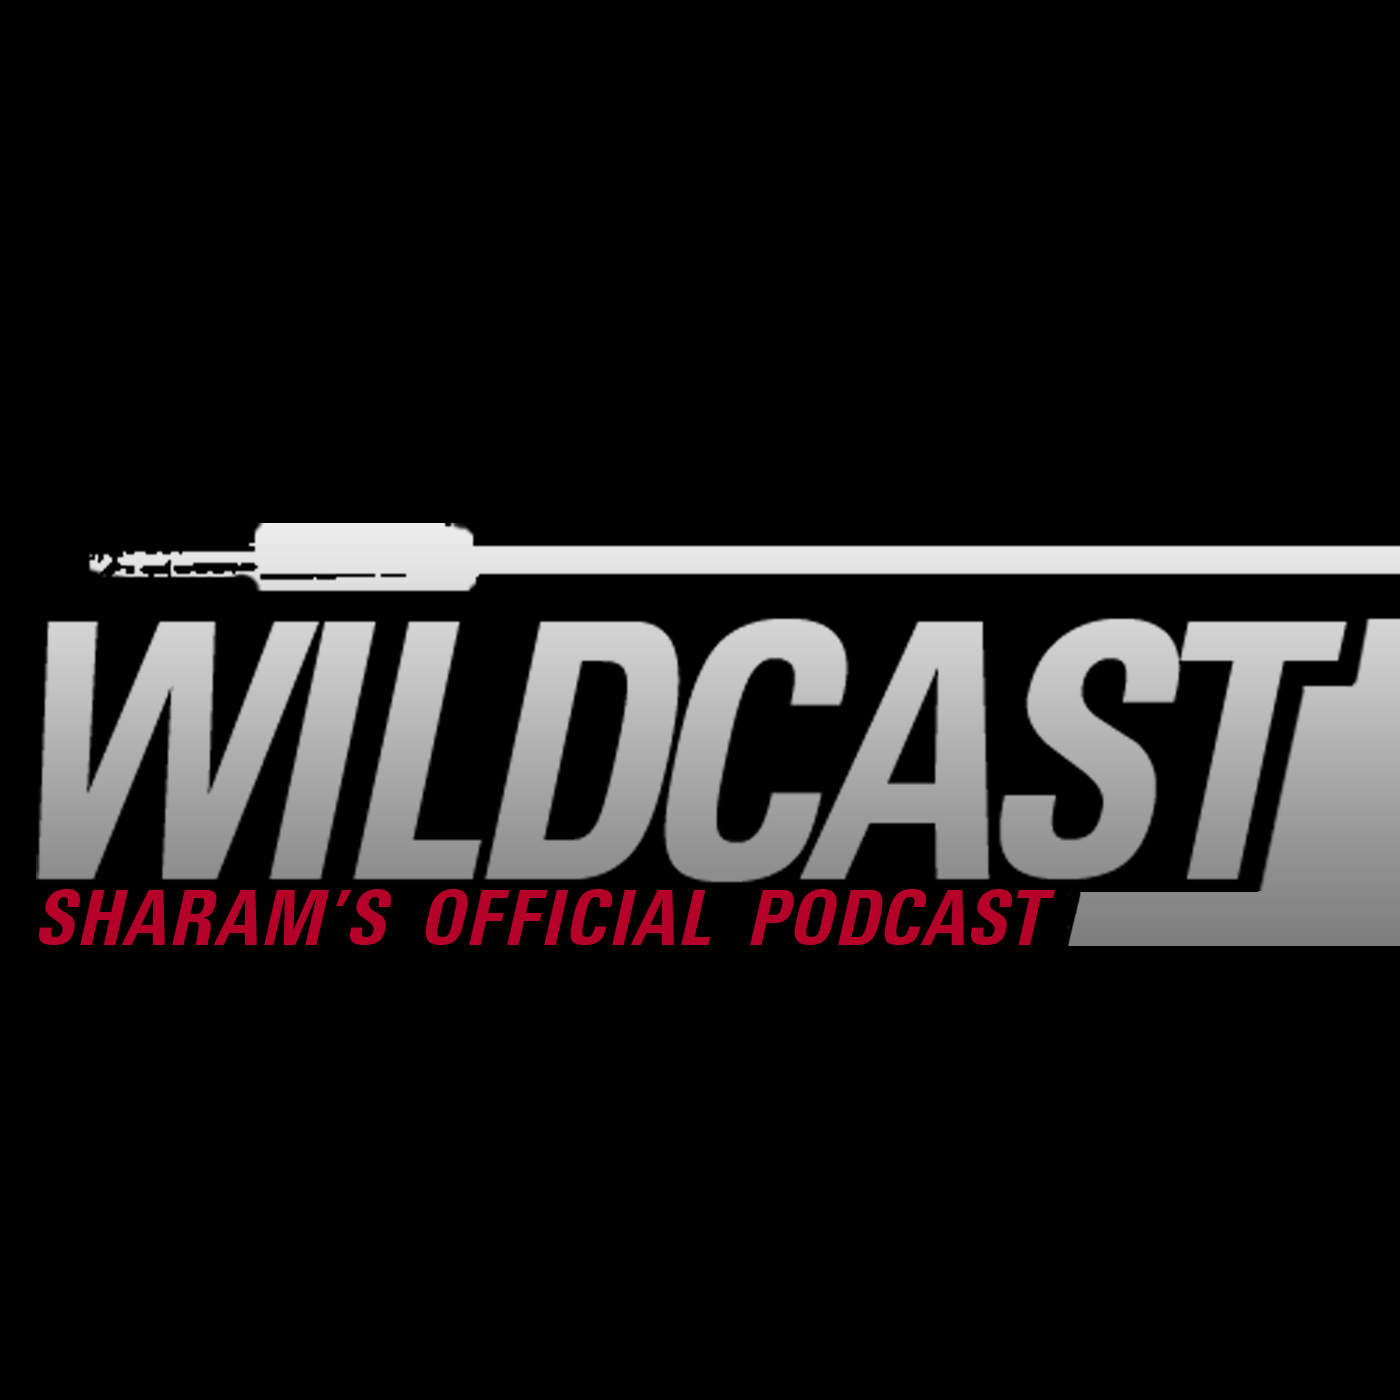 WILDCAST EPISODE 64 - 2 Hour Night &amp; Day Special